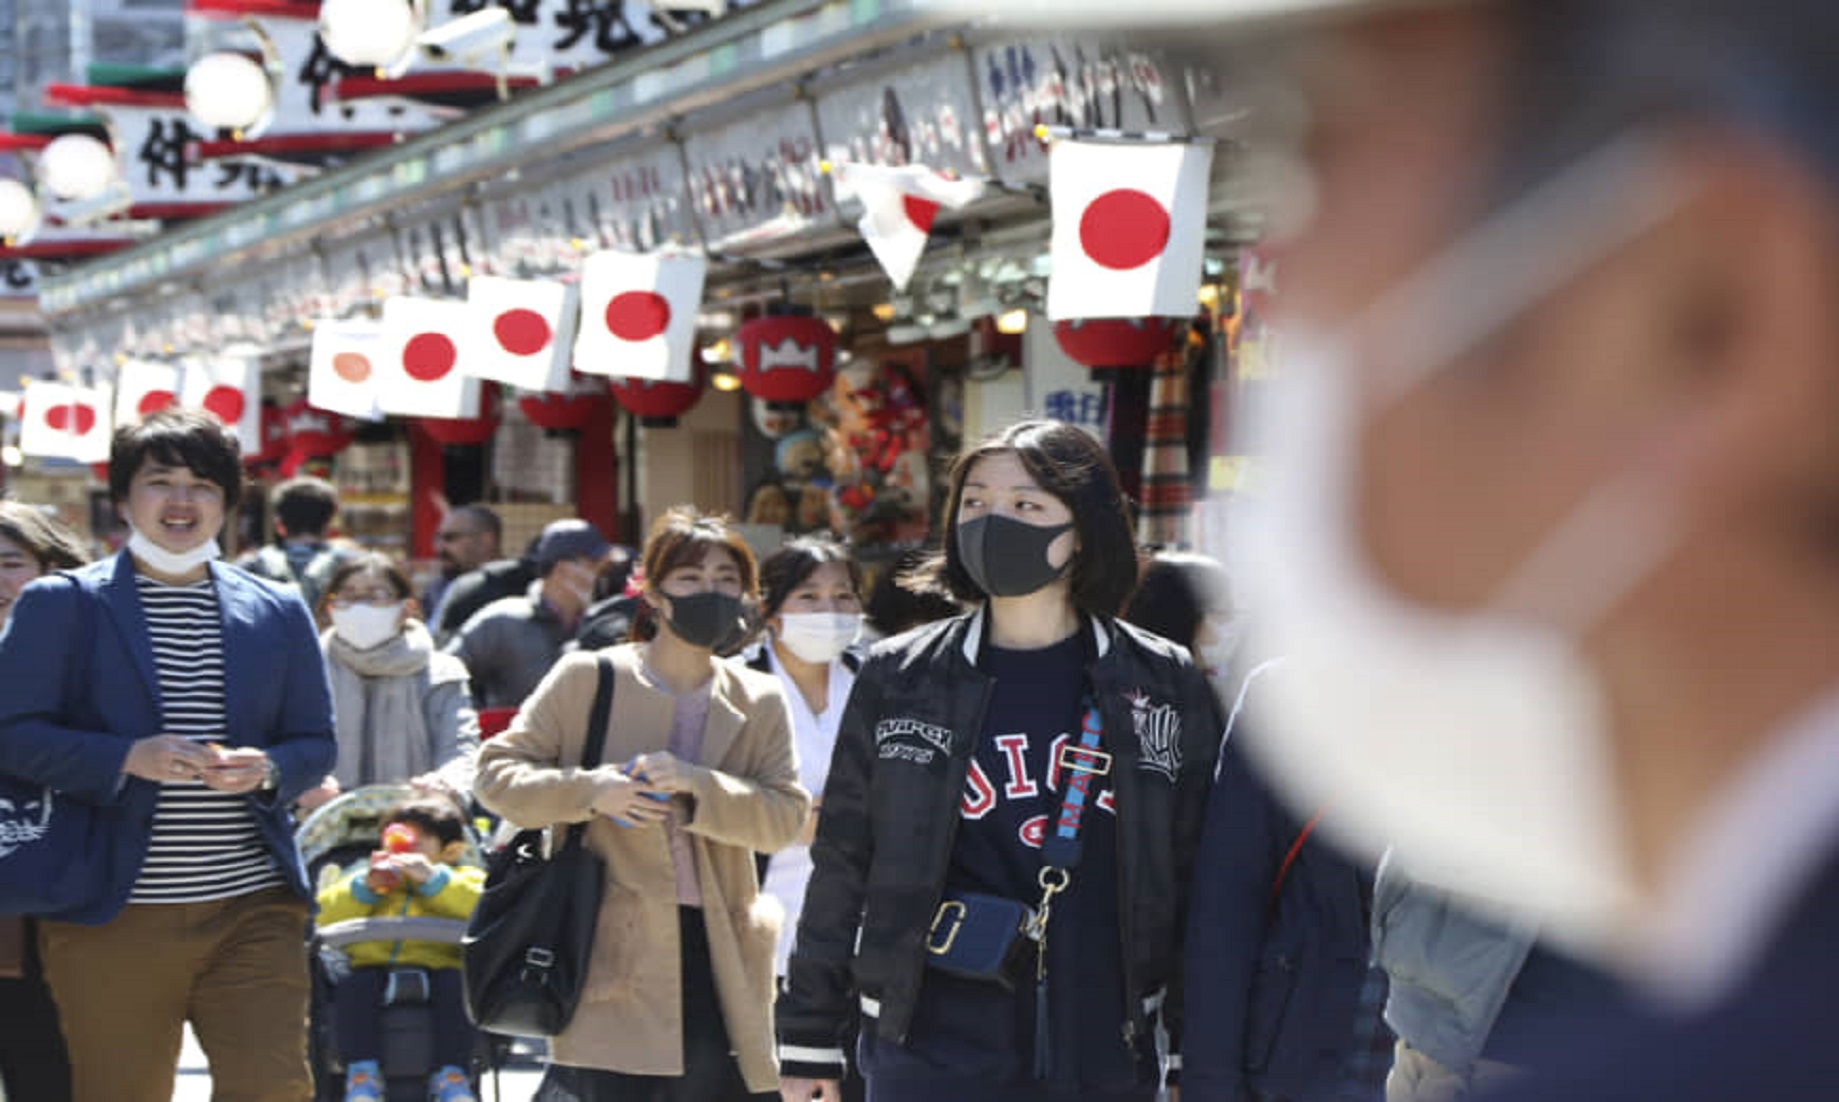 Covid-19: Japan to extend state of emergency over virus – reports